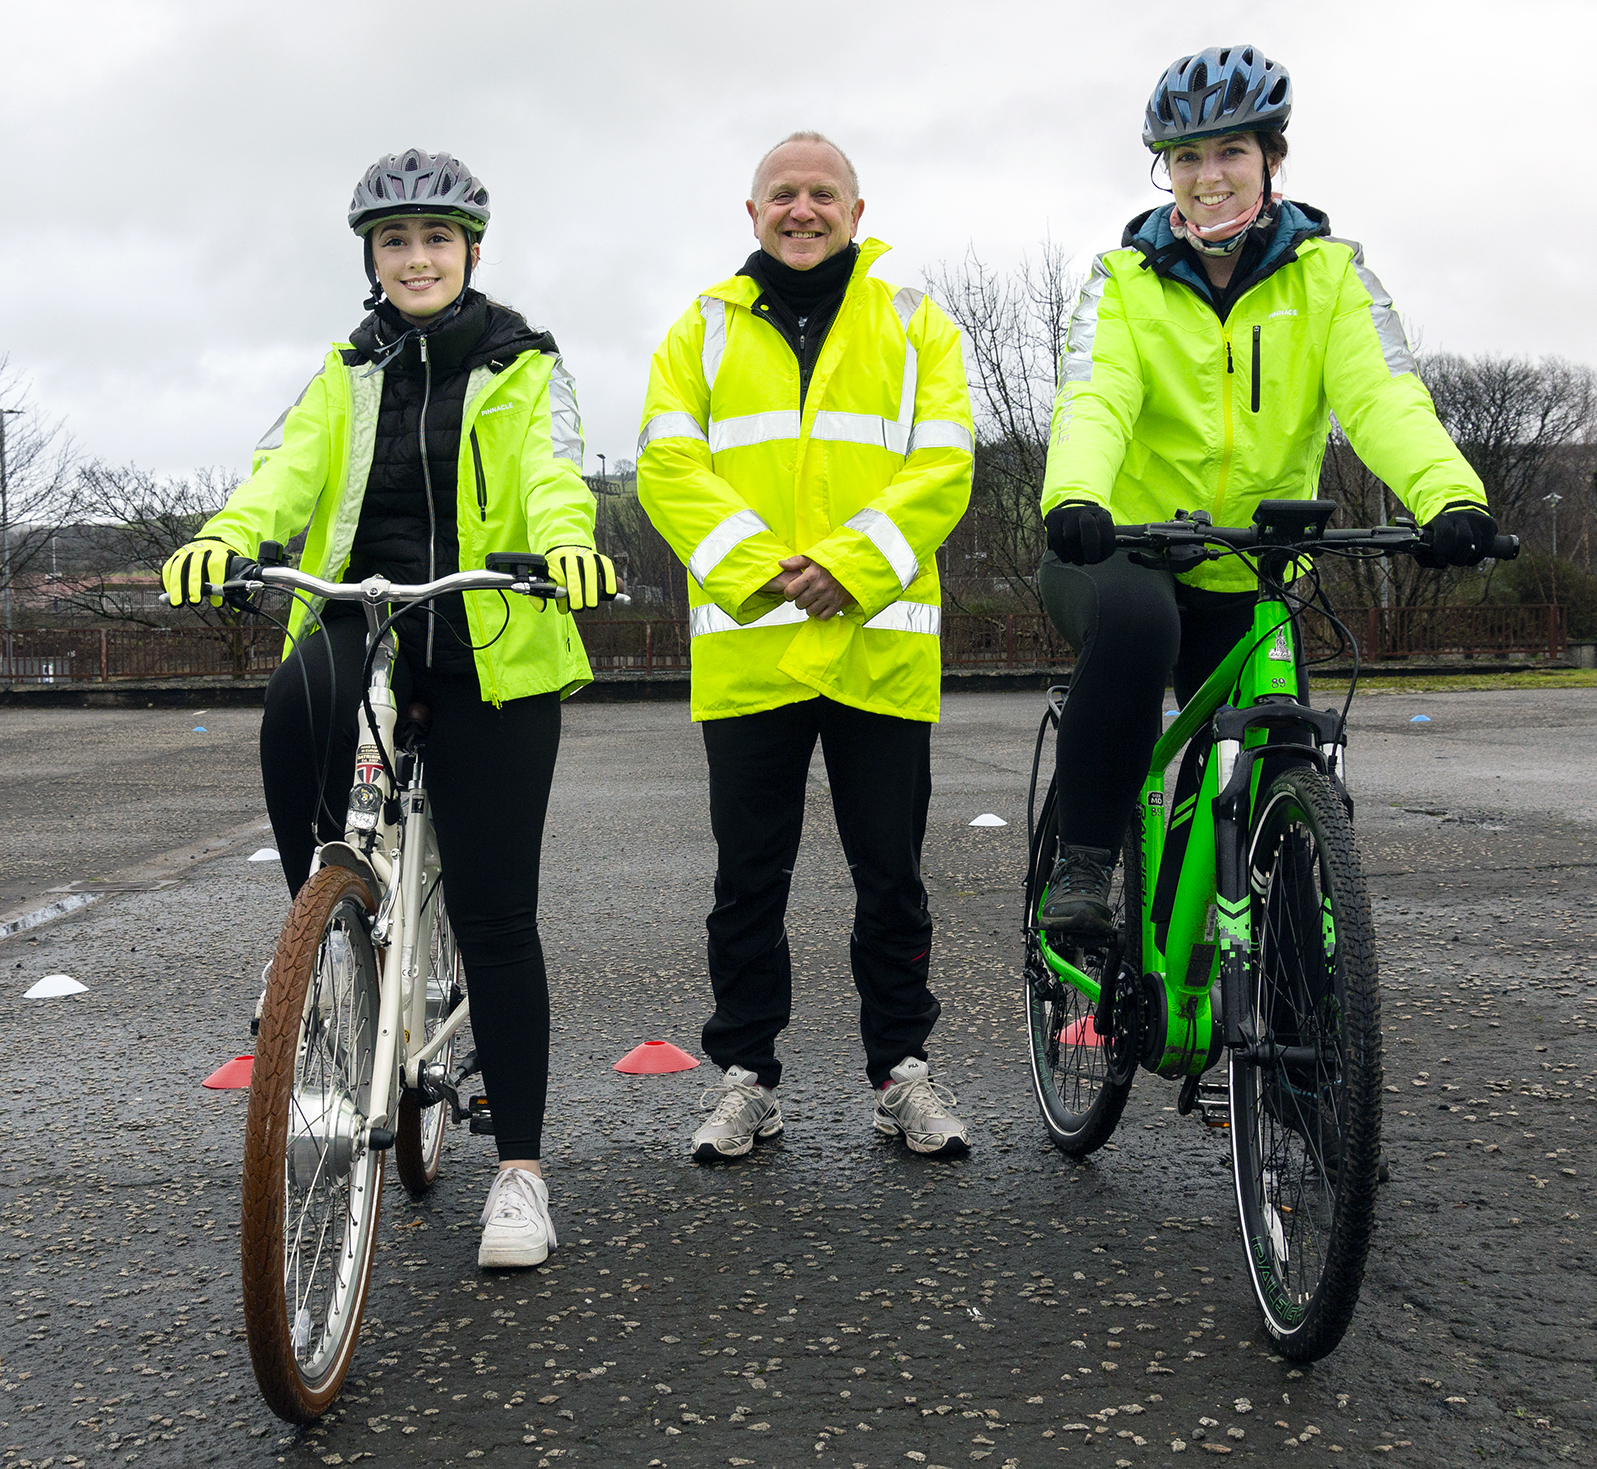 Those joining the session for the first time take part in a cycle skills class